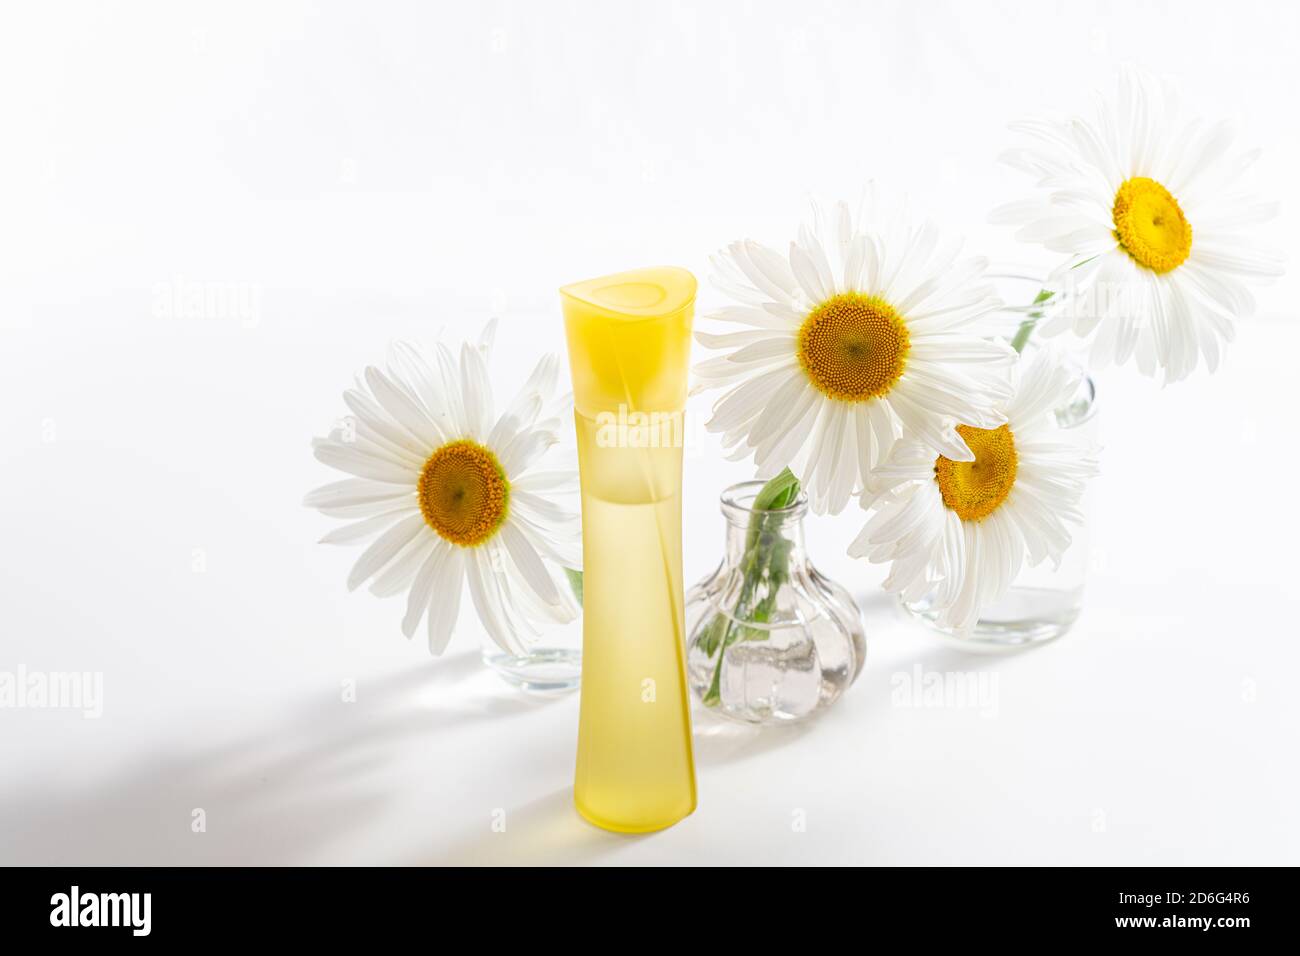 Beautiful chamomiles or daisy flowers and cosmetic product in bottle on white. Floral composition with perfume or essential oils. Organic cosmetology, Stock Photo